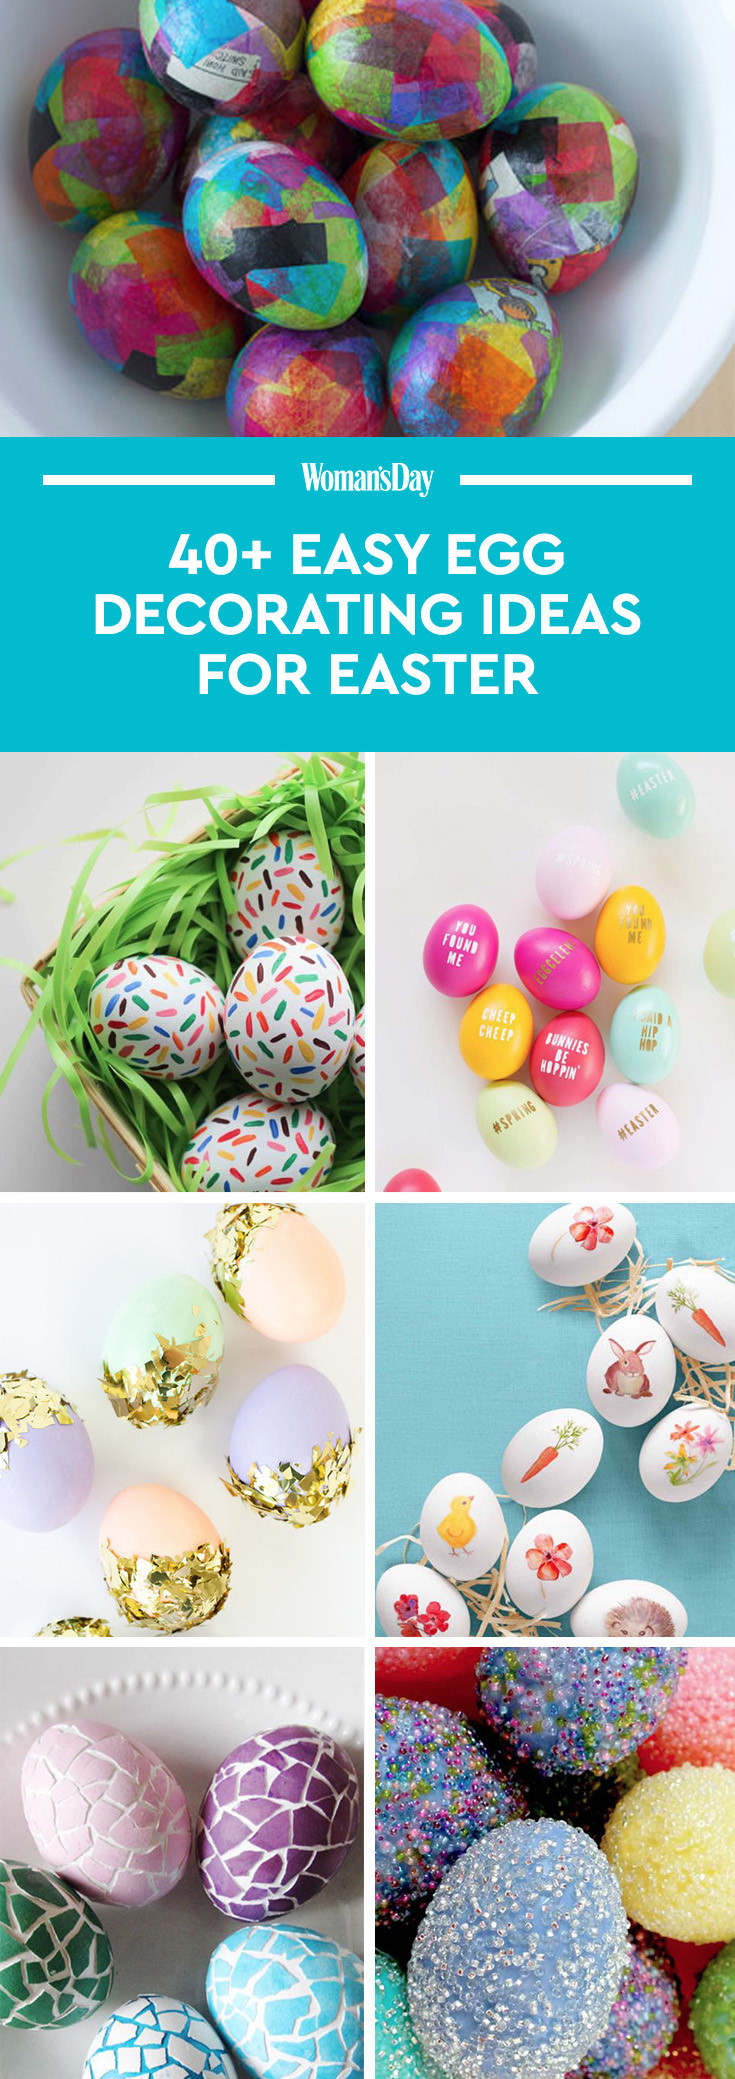 Fun Ideas For Easter
 42 Cool Easter Egg Decorating Ideas Creative Designs for